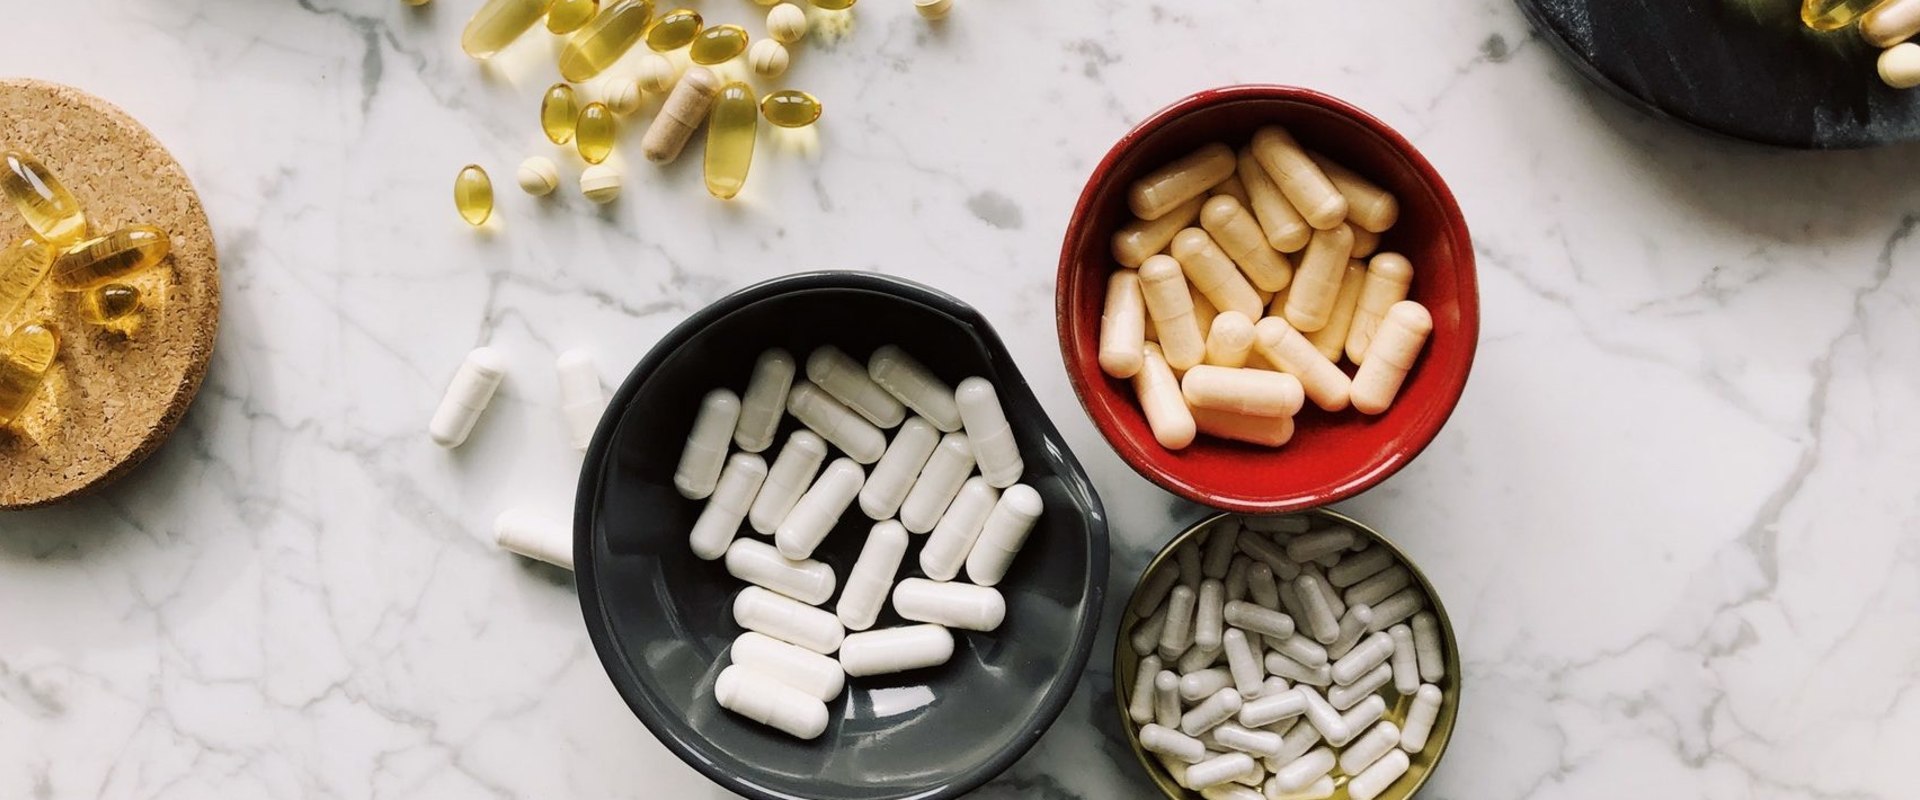 Do Enzyme Supplements Help with Anti-Aging Benefits?